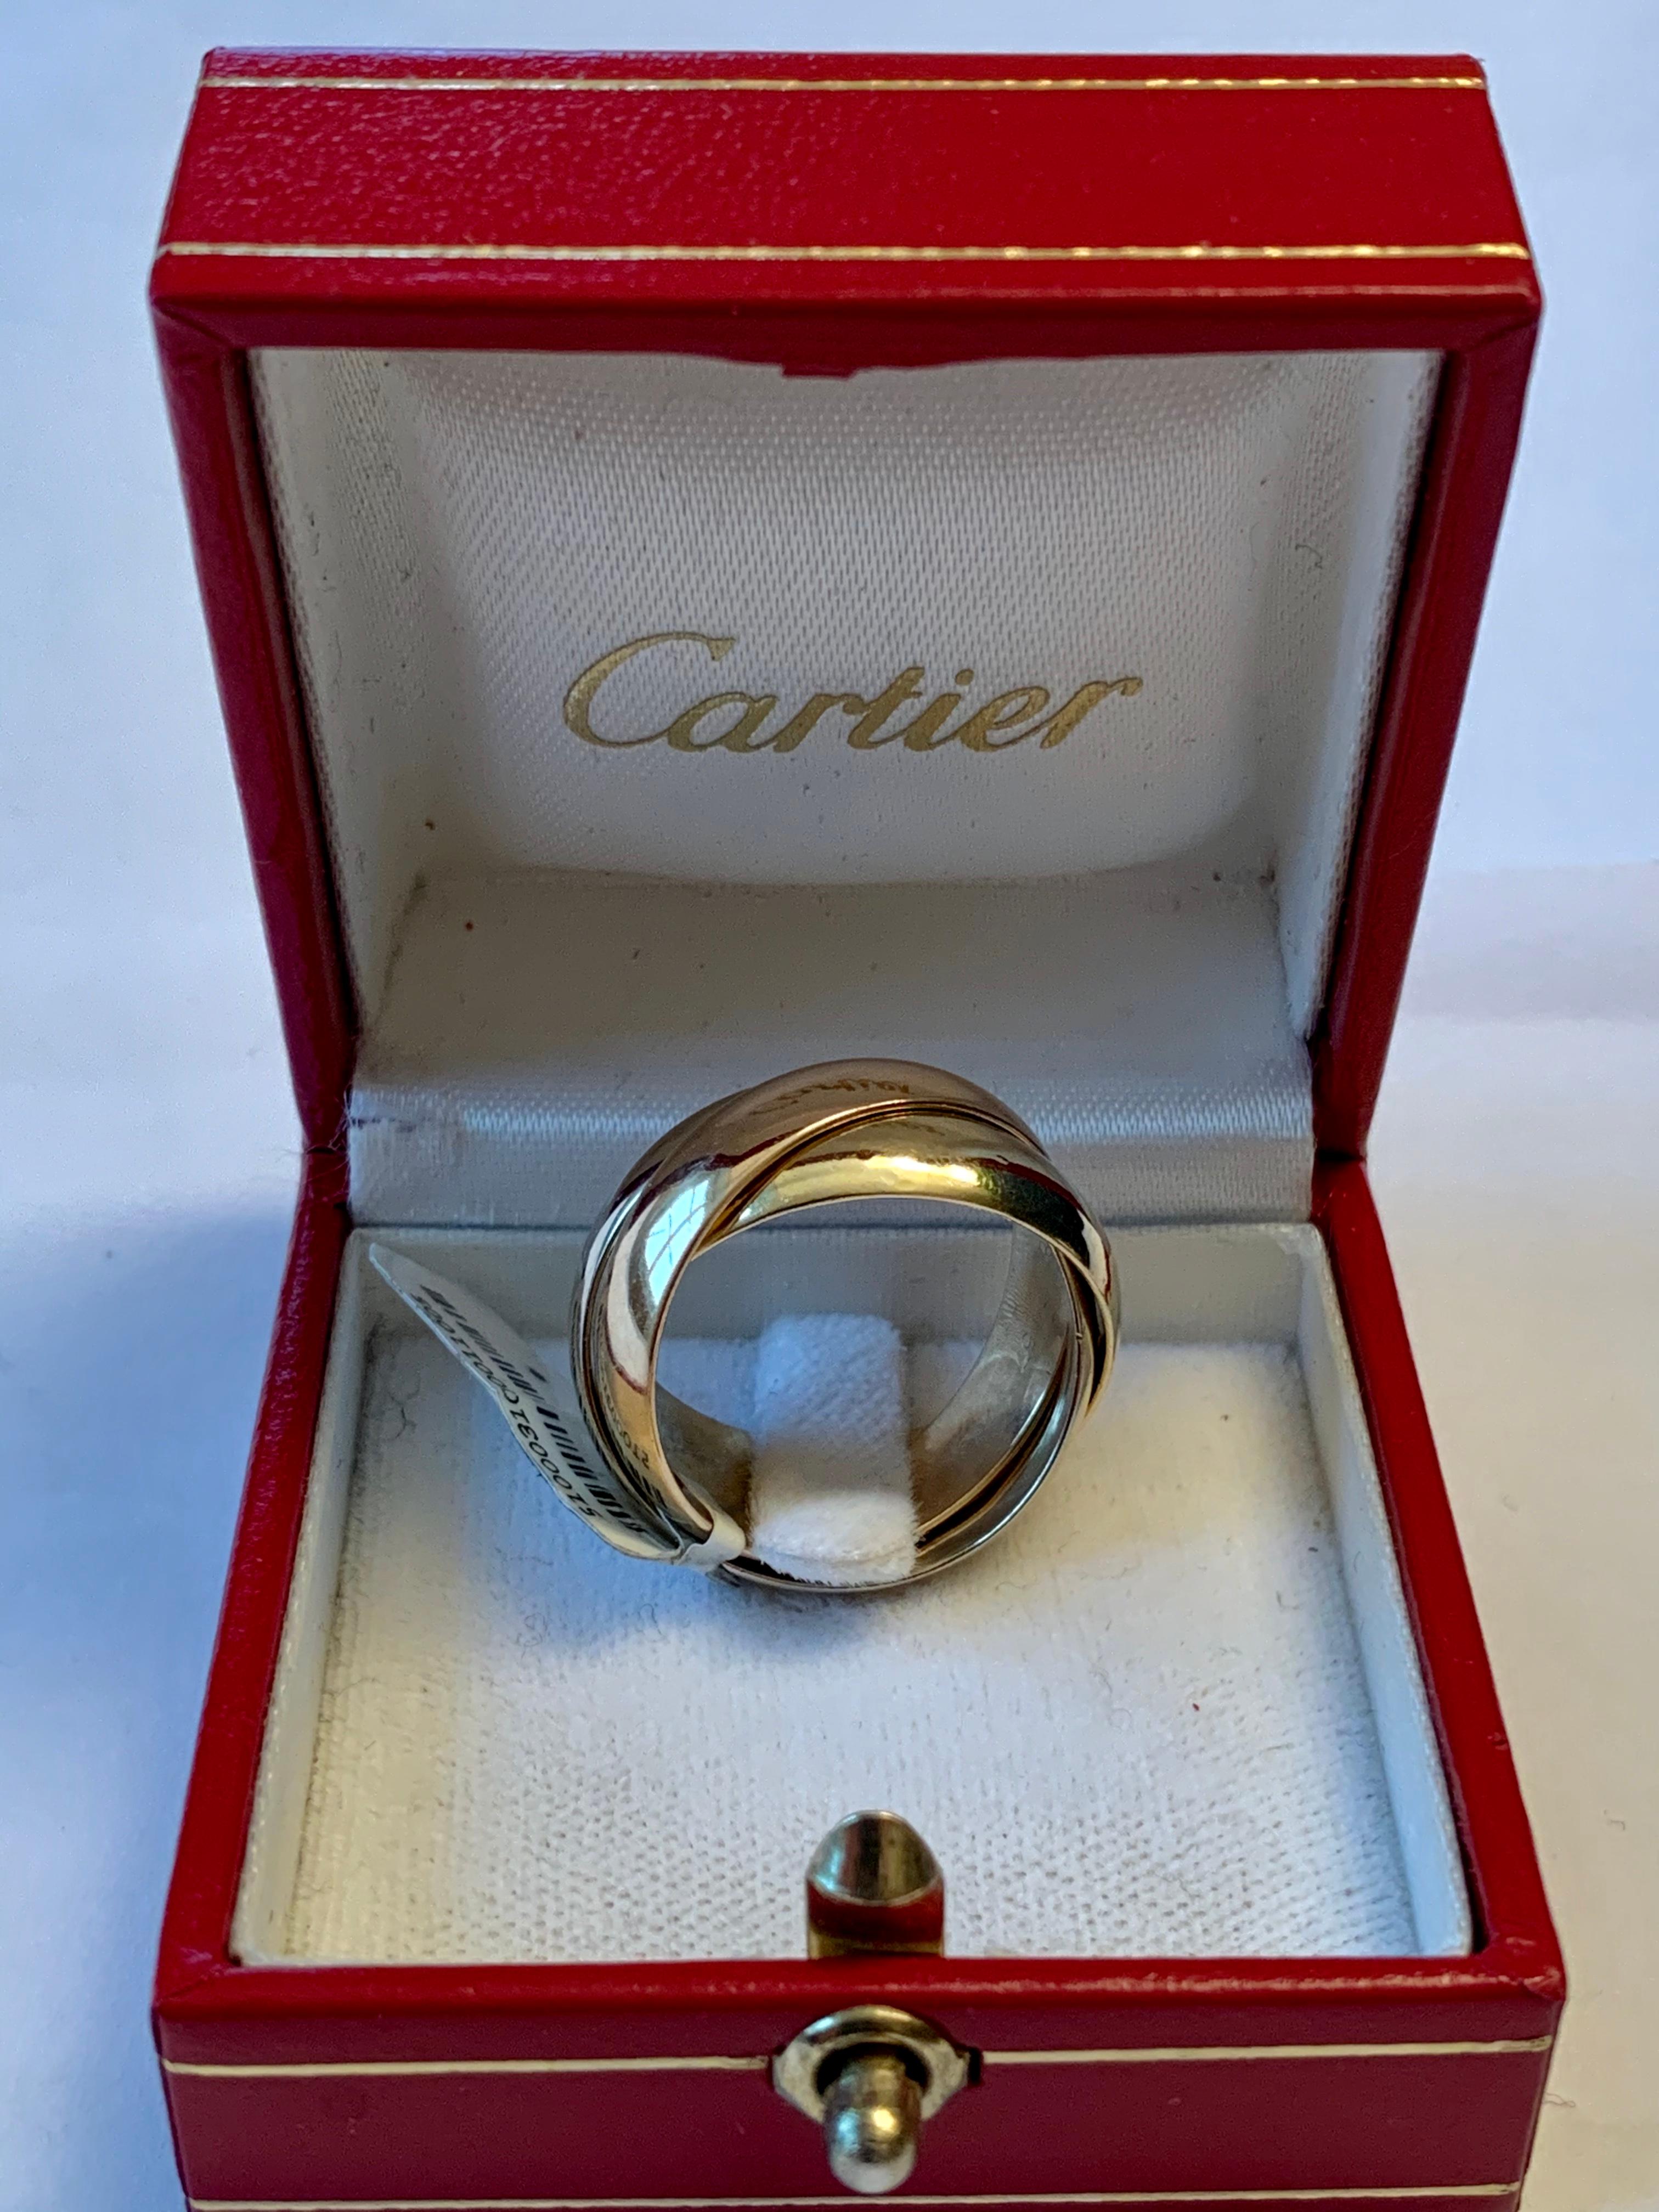 We guarantee this is an authentic CARTIER 18K Pink Yellow White Gold Large Trinity Ring 57 8 . This stunning ring is a criss cross band of 18 karat pink, yellow, and white gold. This is a beautiful ring with the classical style only from Cartier!